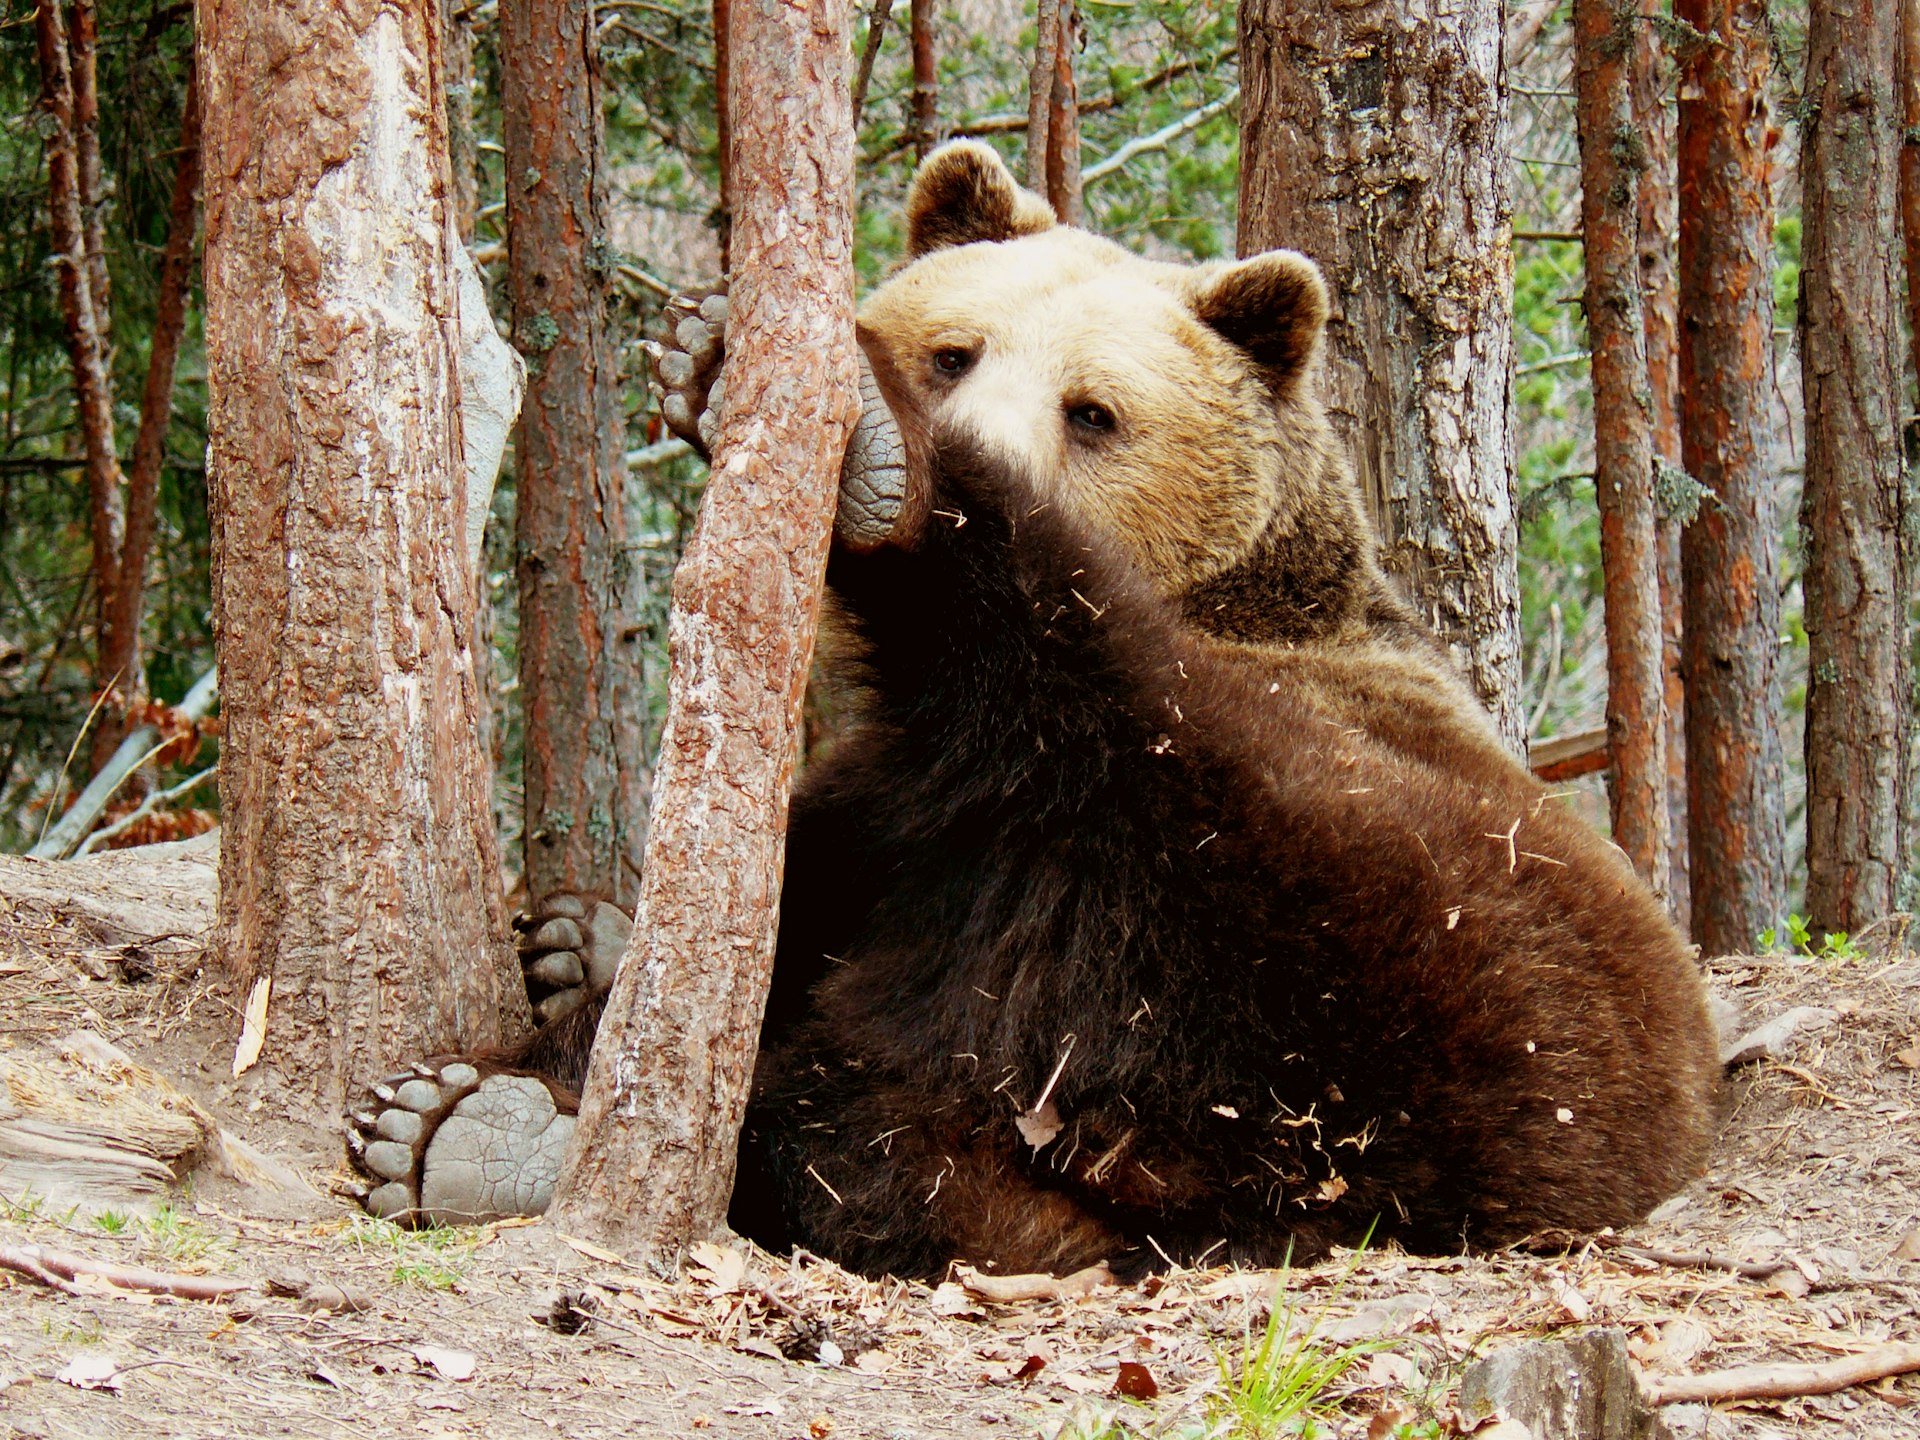 A large brown bear sits among tree trunks with one of its dusty paws up on the tree.